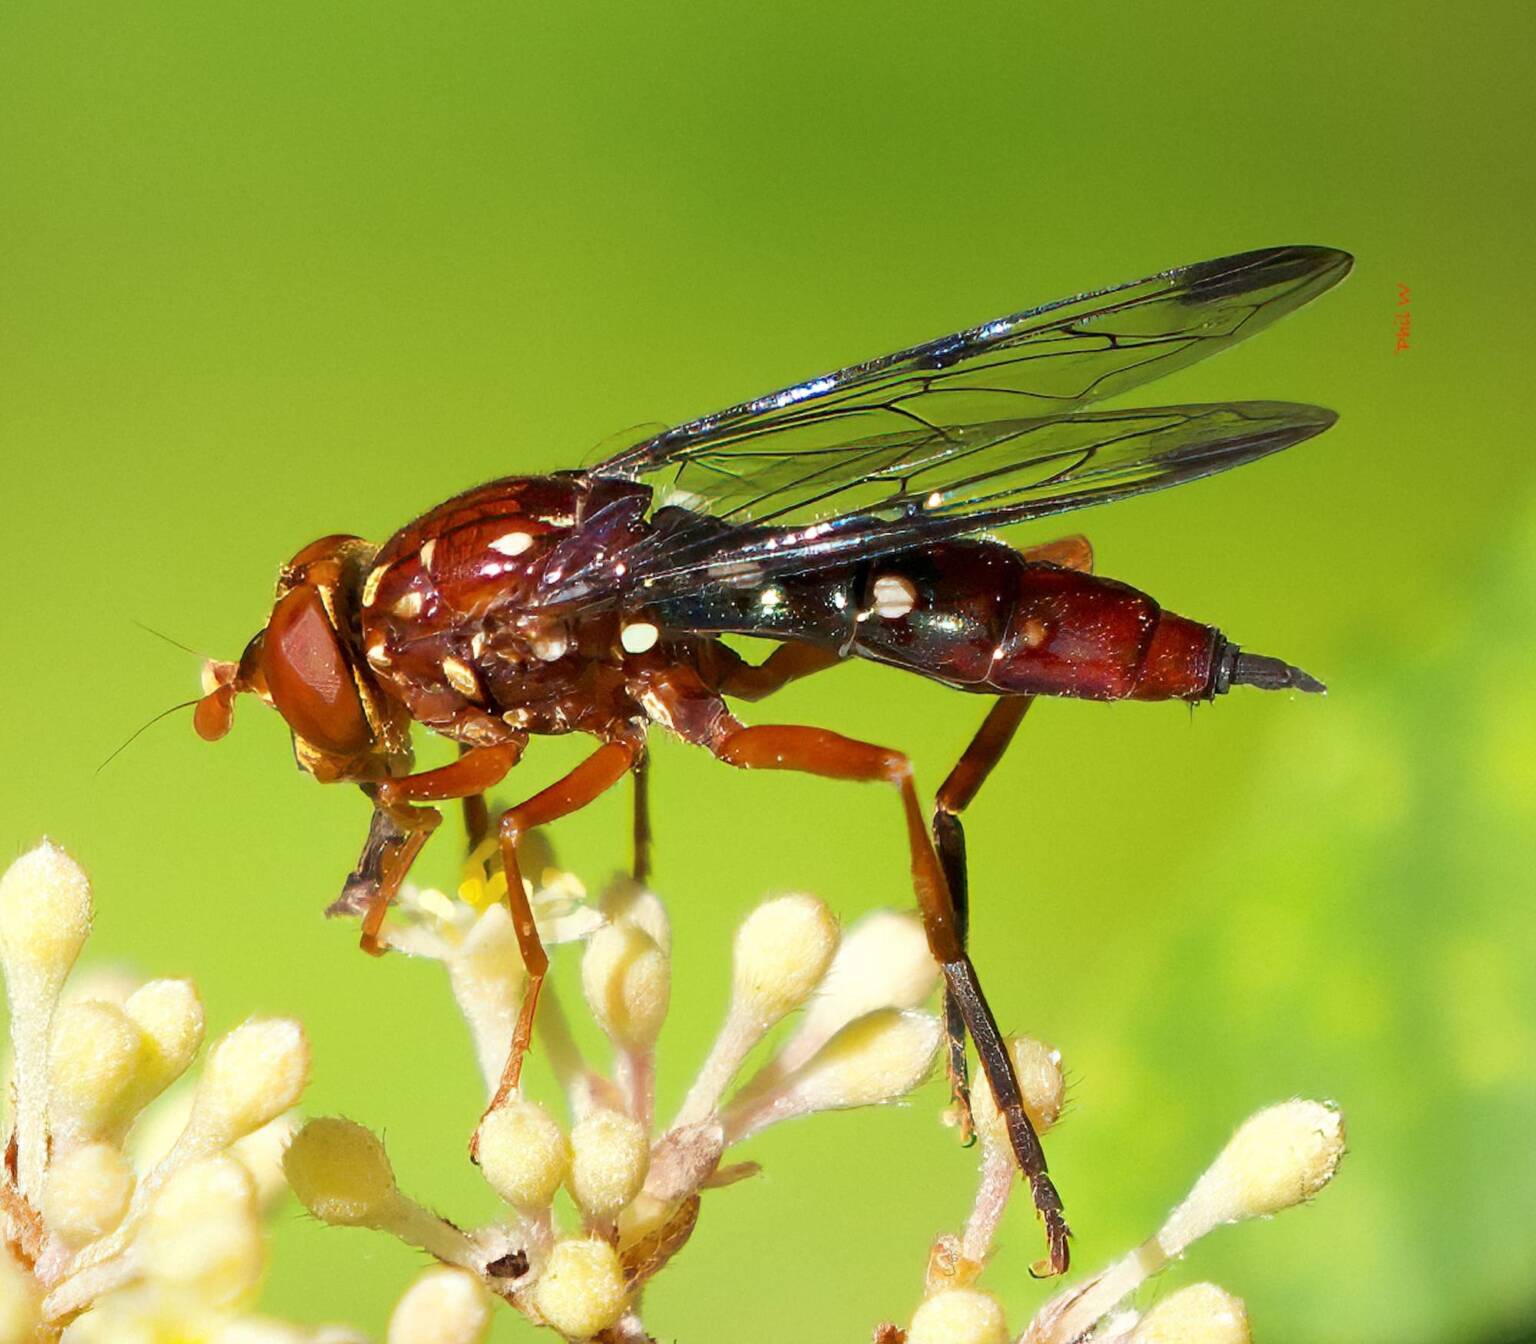 Odyneromyia iridescens (White-spotted Red Hoverfly) on flowers of Pomaderris discolor, NSW © Phil Warburton